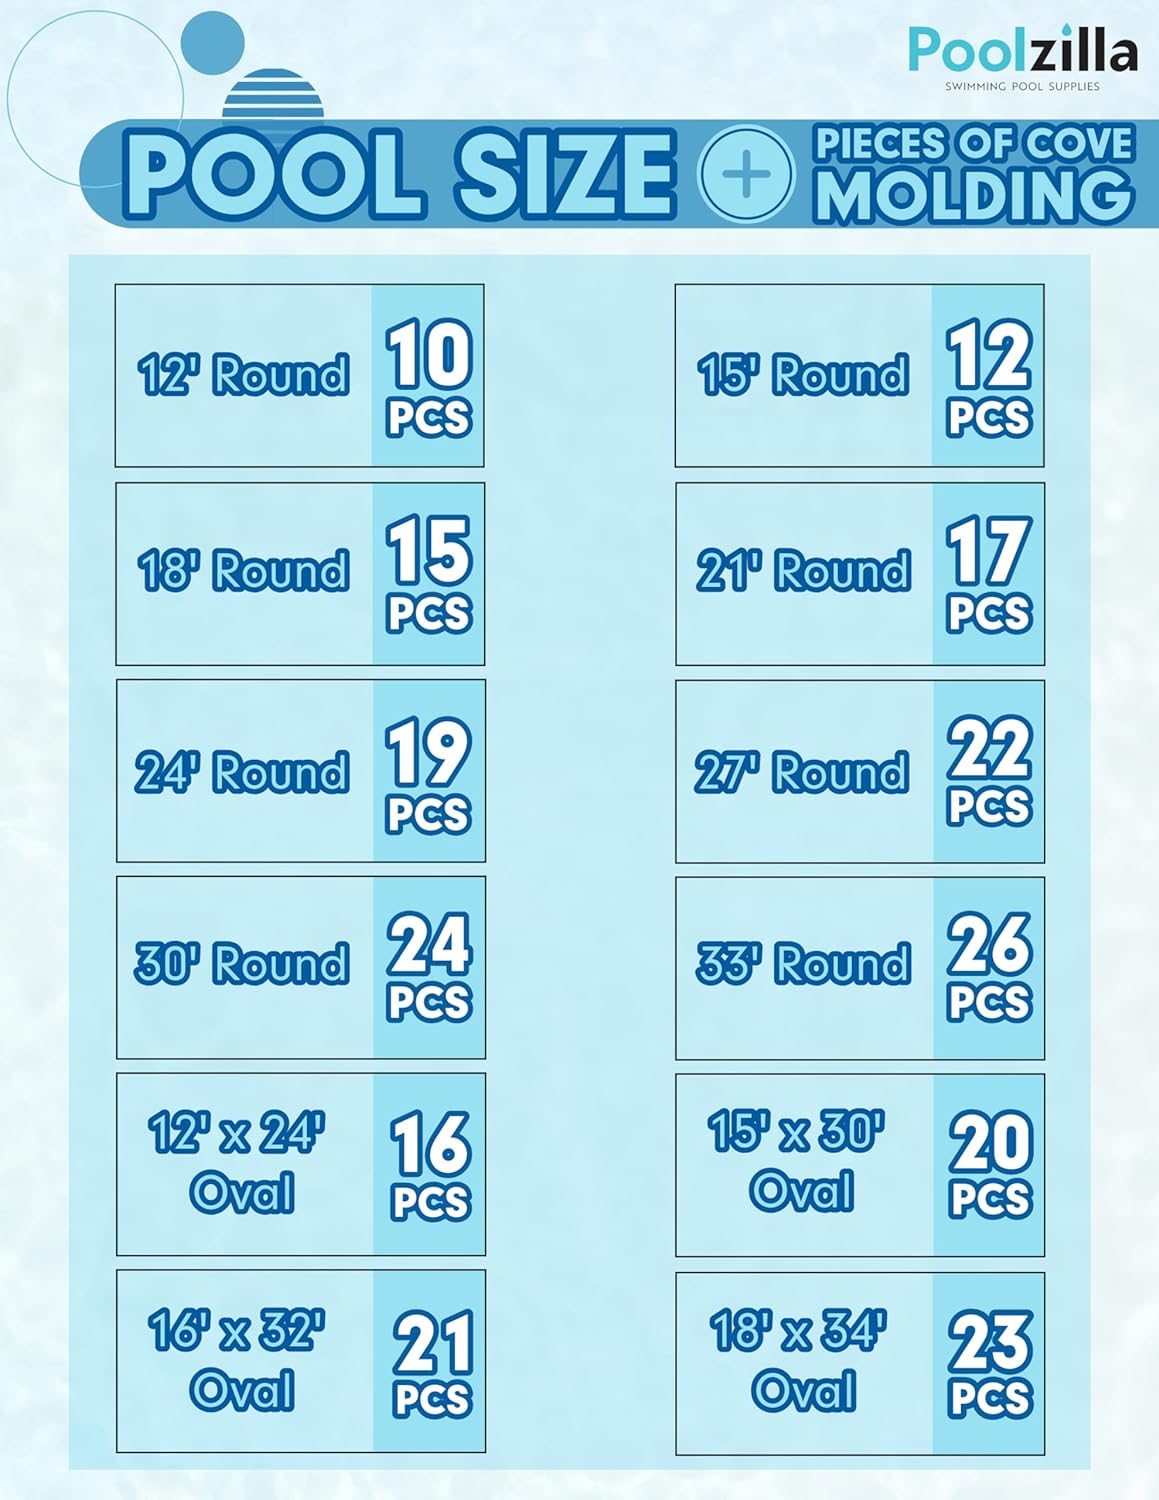 48’’ Inch Pool Cove for Above-Ground Pools - Peel and Stick Foam